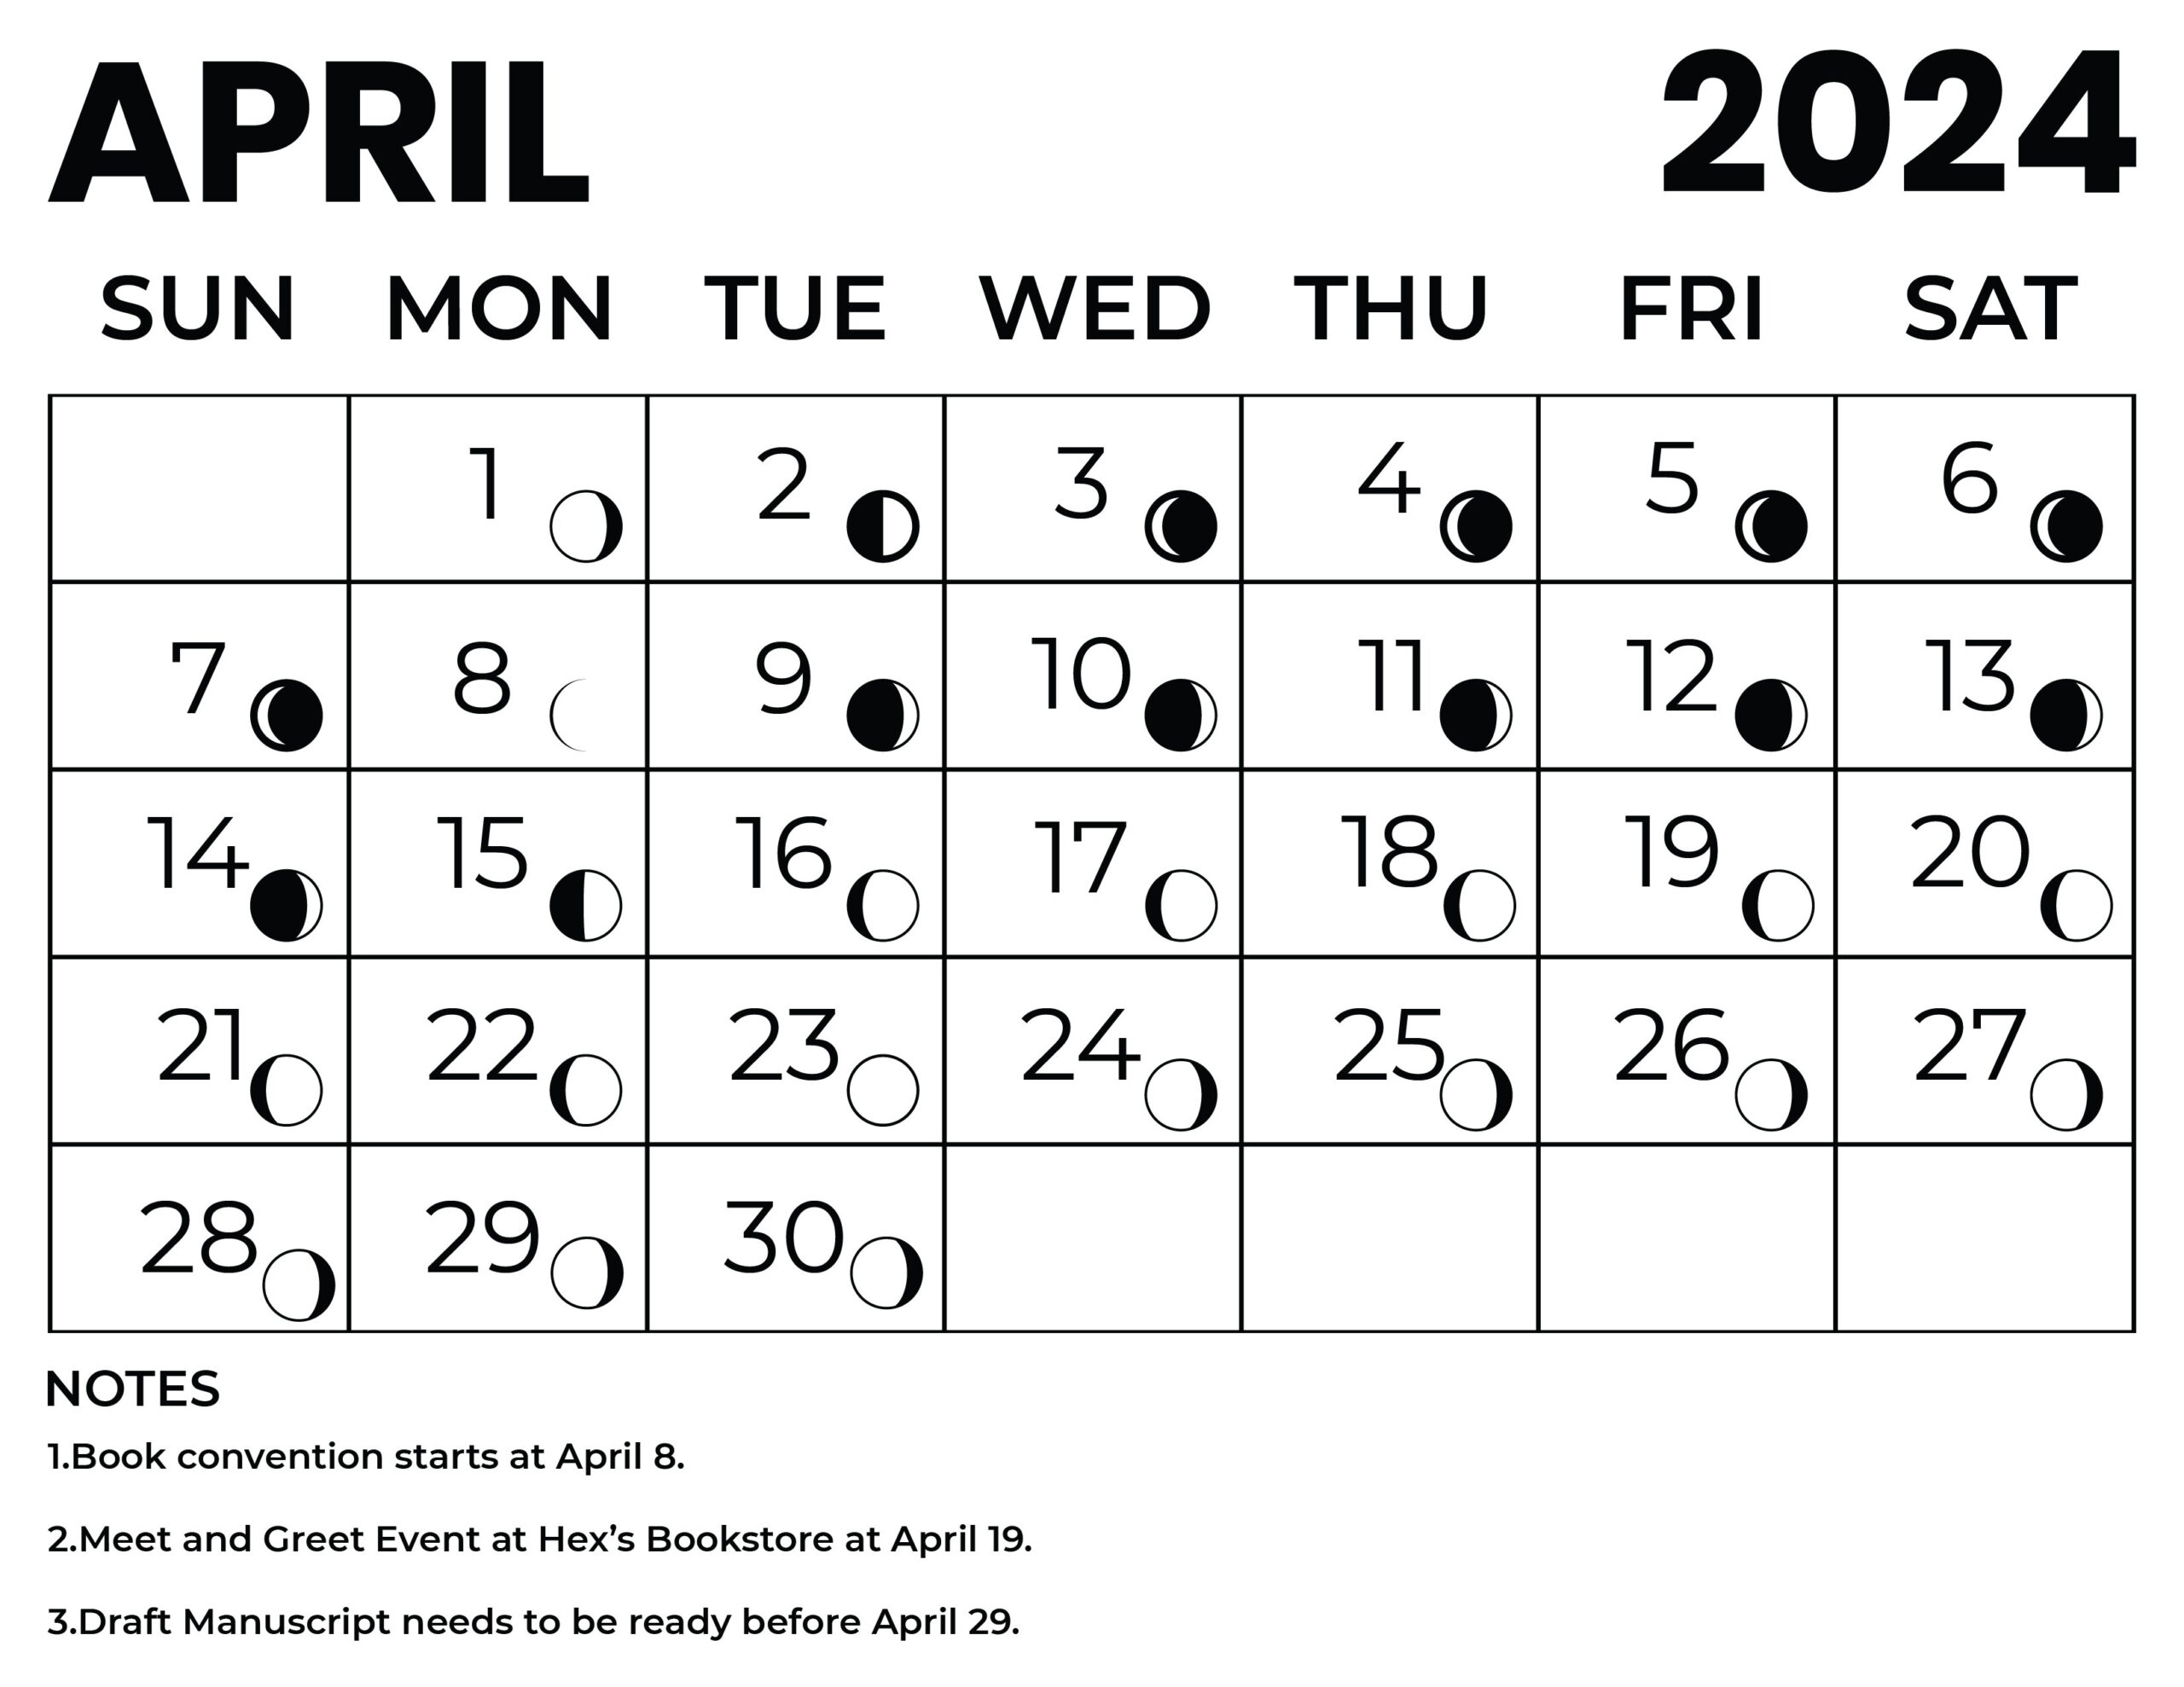 April 2024 Calendar With Moon Phases - Word, Illustrator, Eps, Svg for Calendar With Moon Phases 2024 Printable